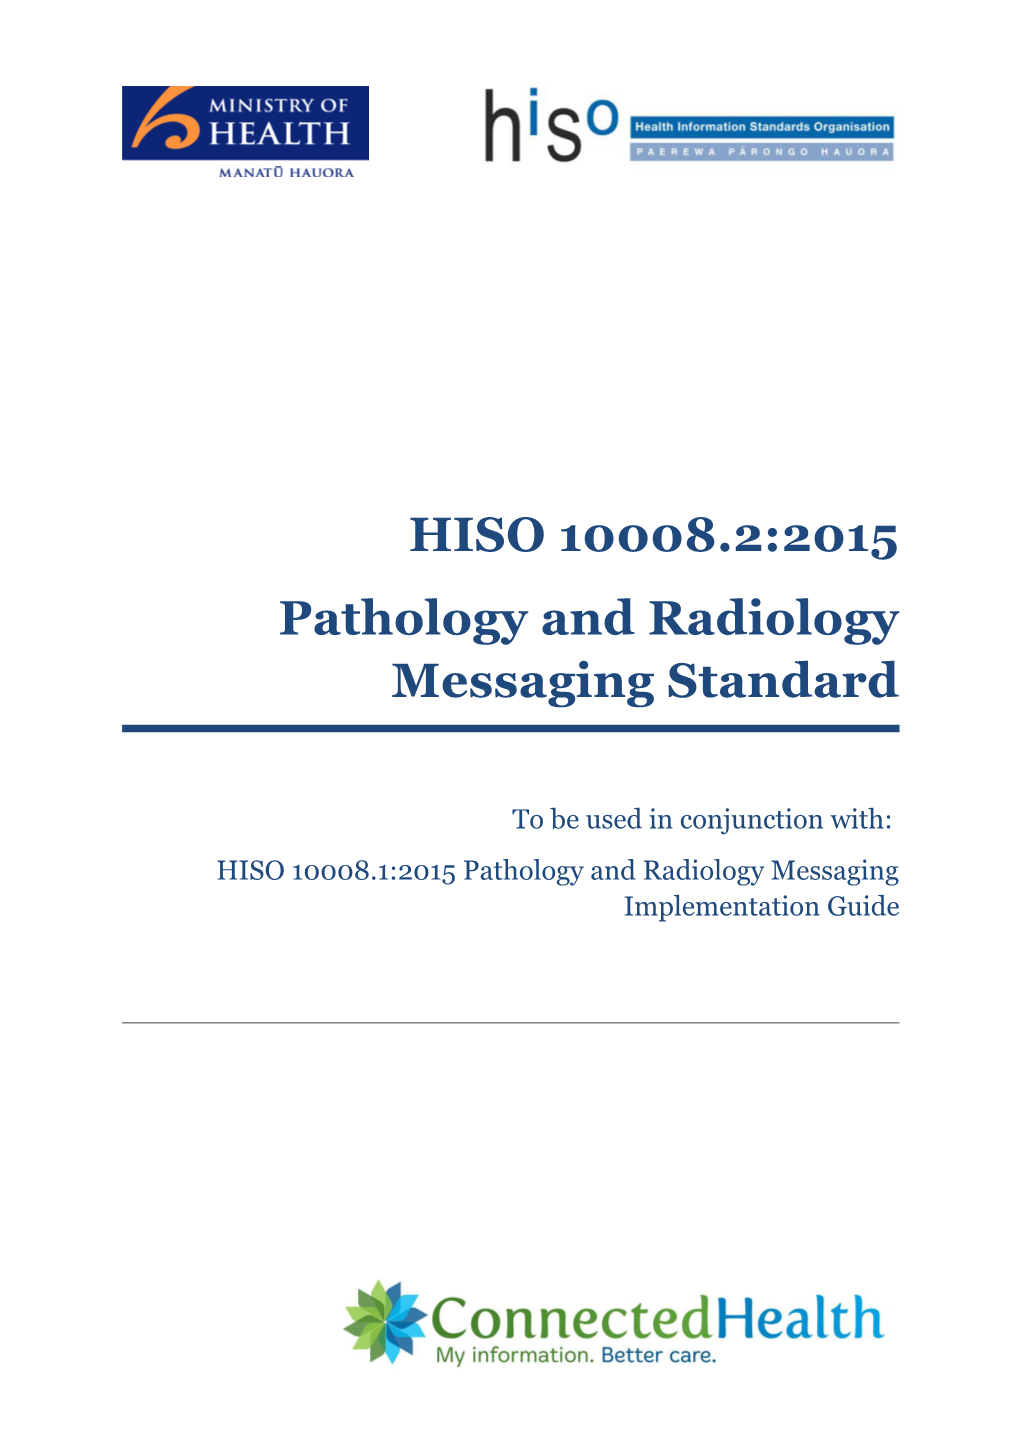 HISO 10008.2:2015 Pathology and Radiology Messaging Standard